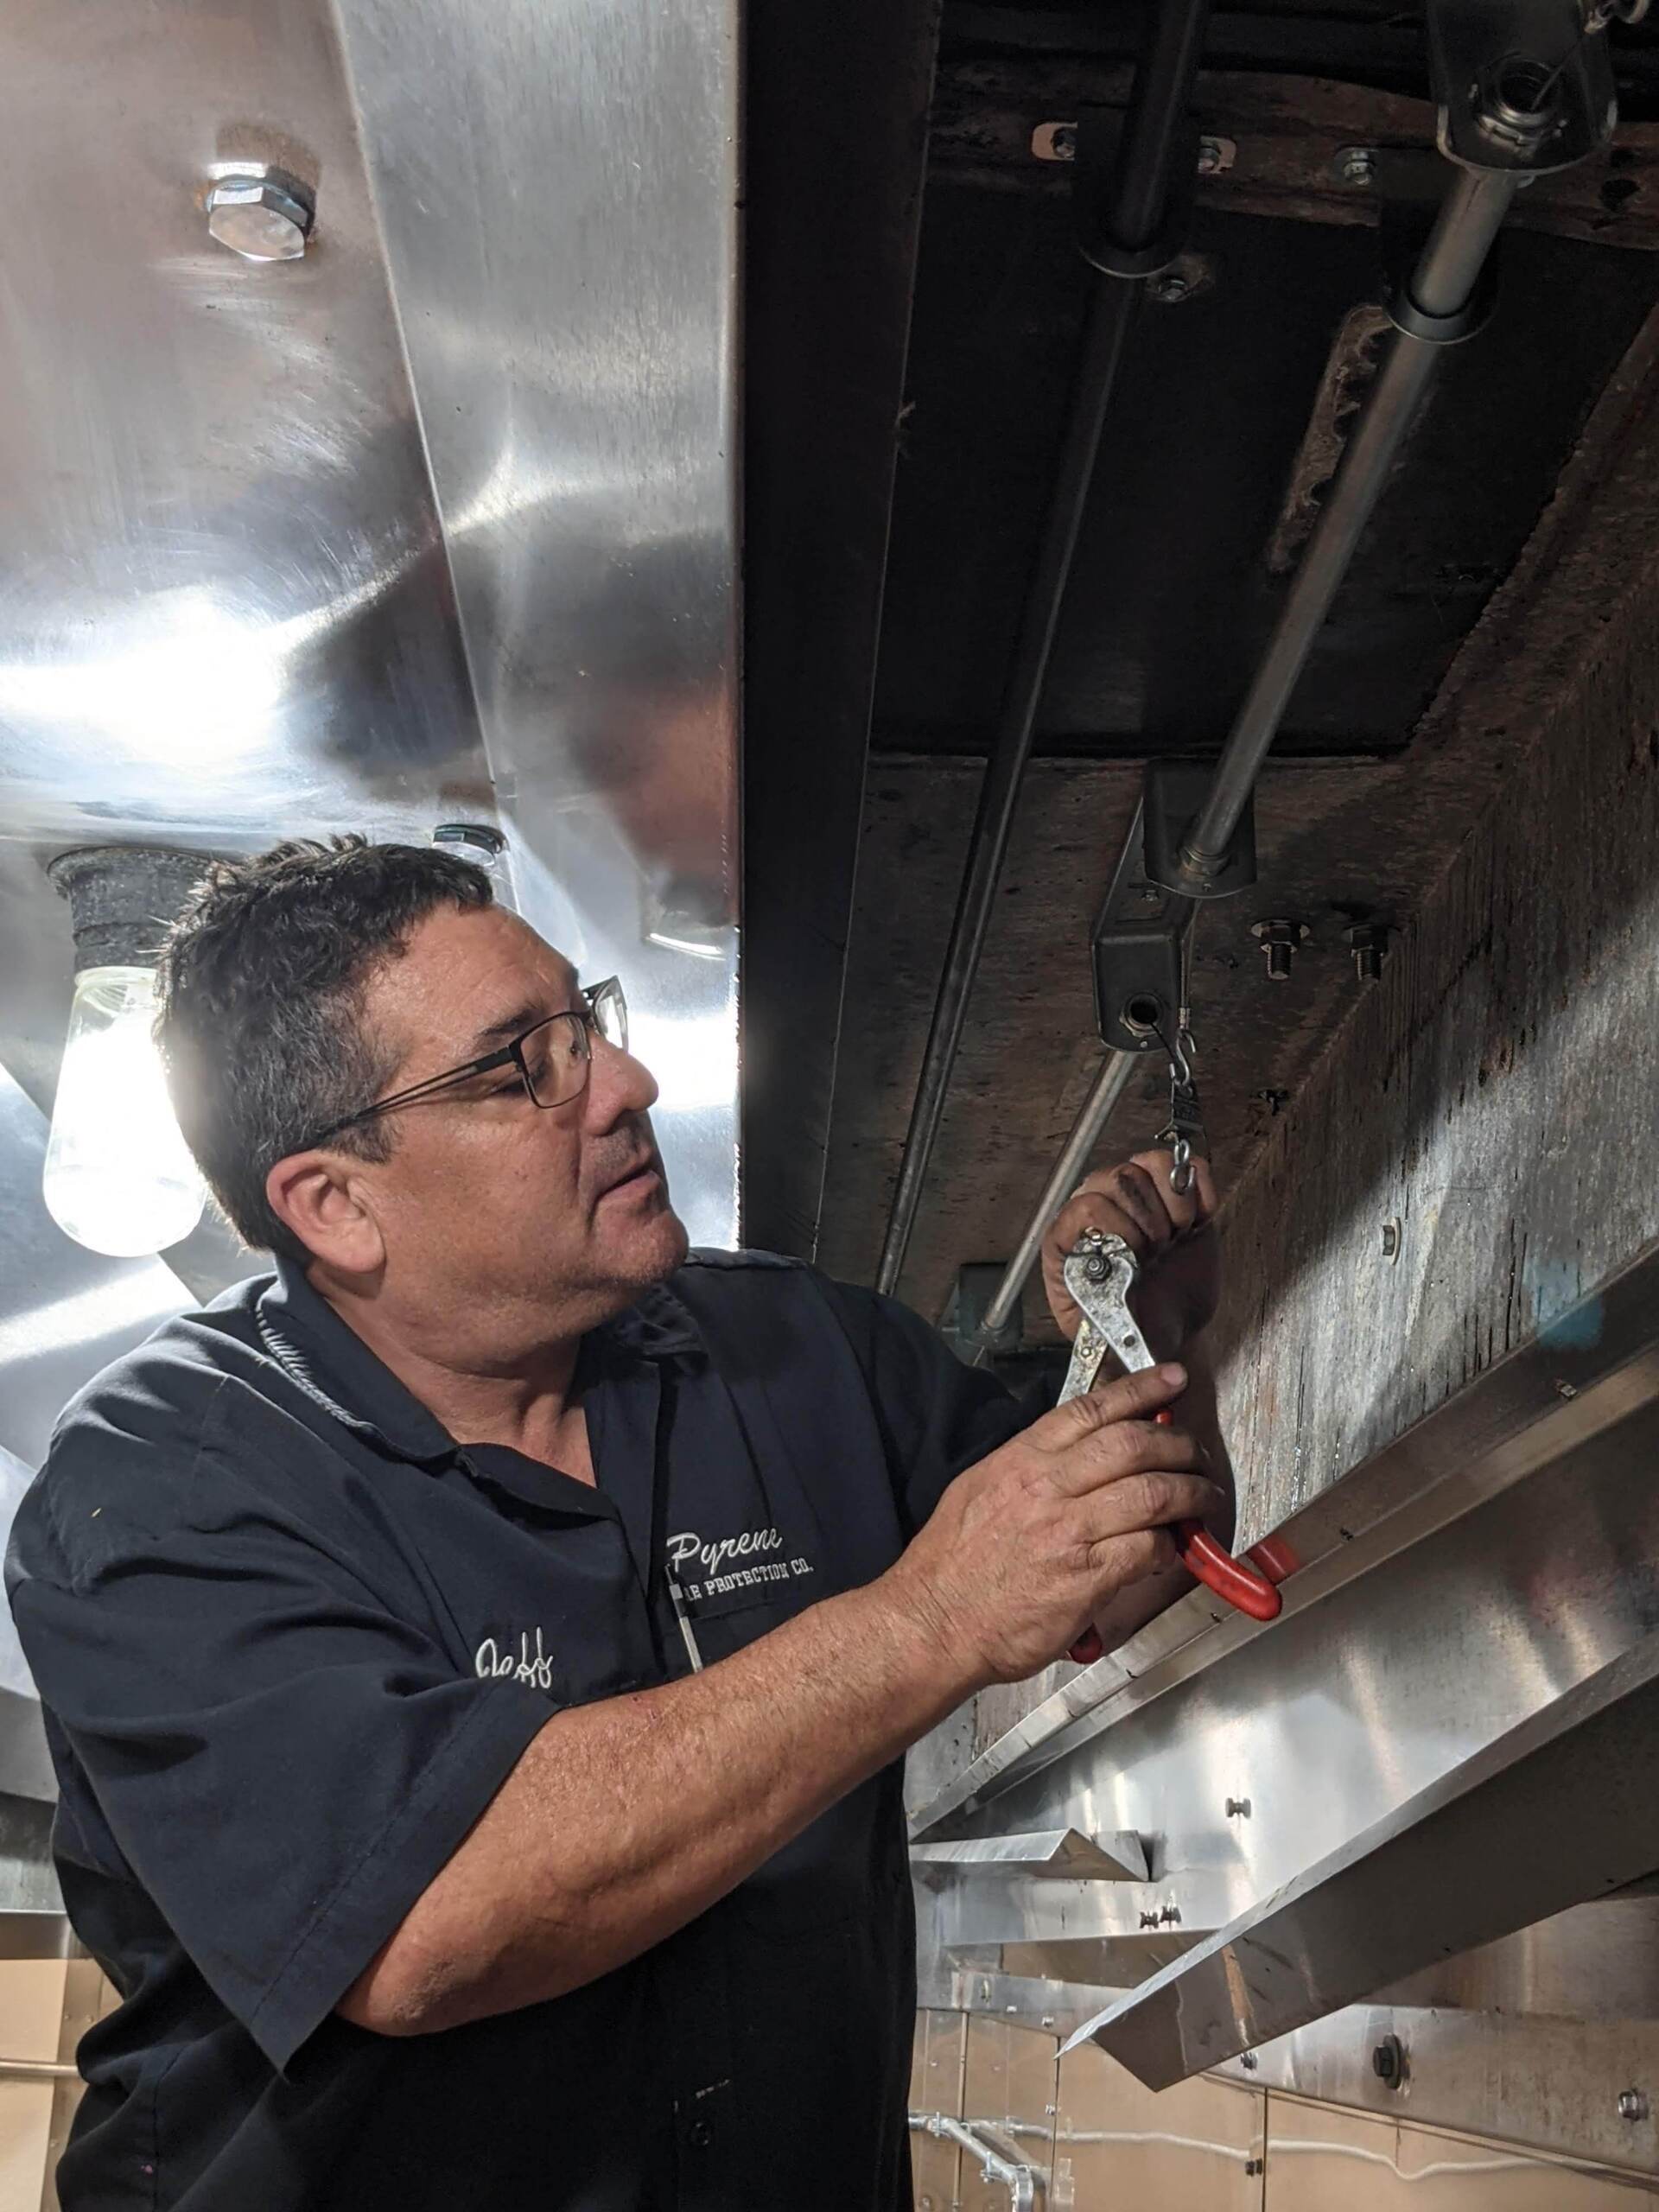 Hood in Commercial Kitchen — St. Louis, MO — Pyrene Fire Protection